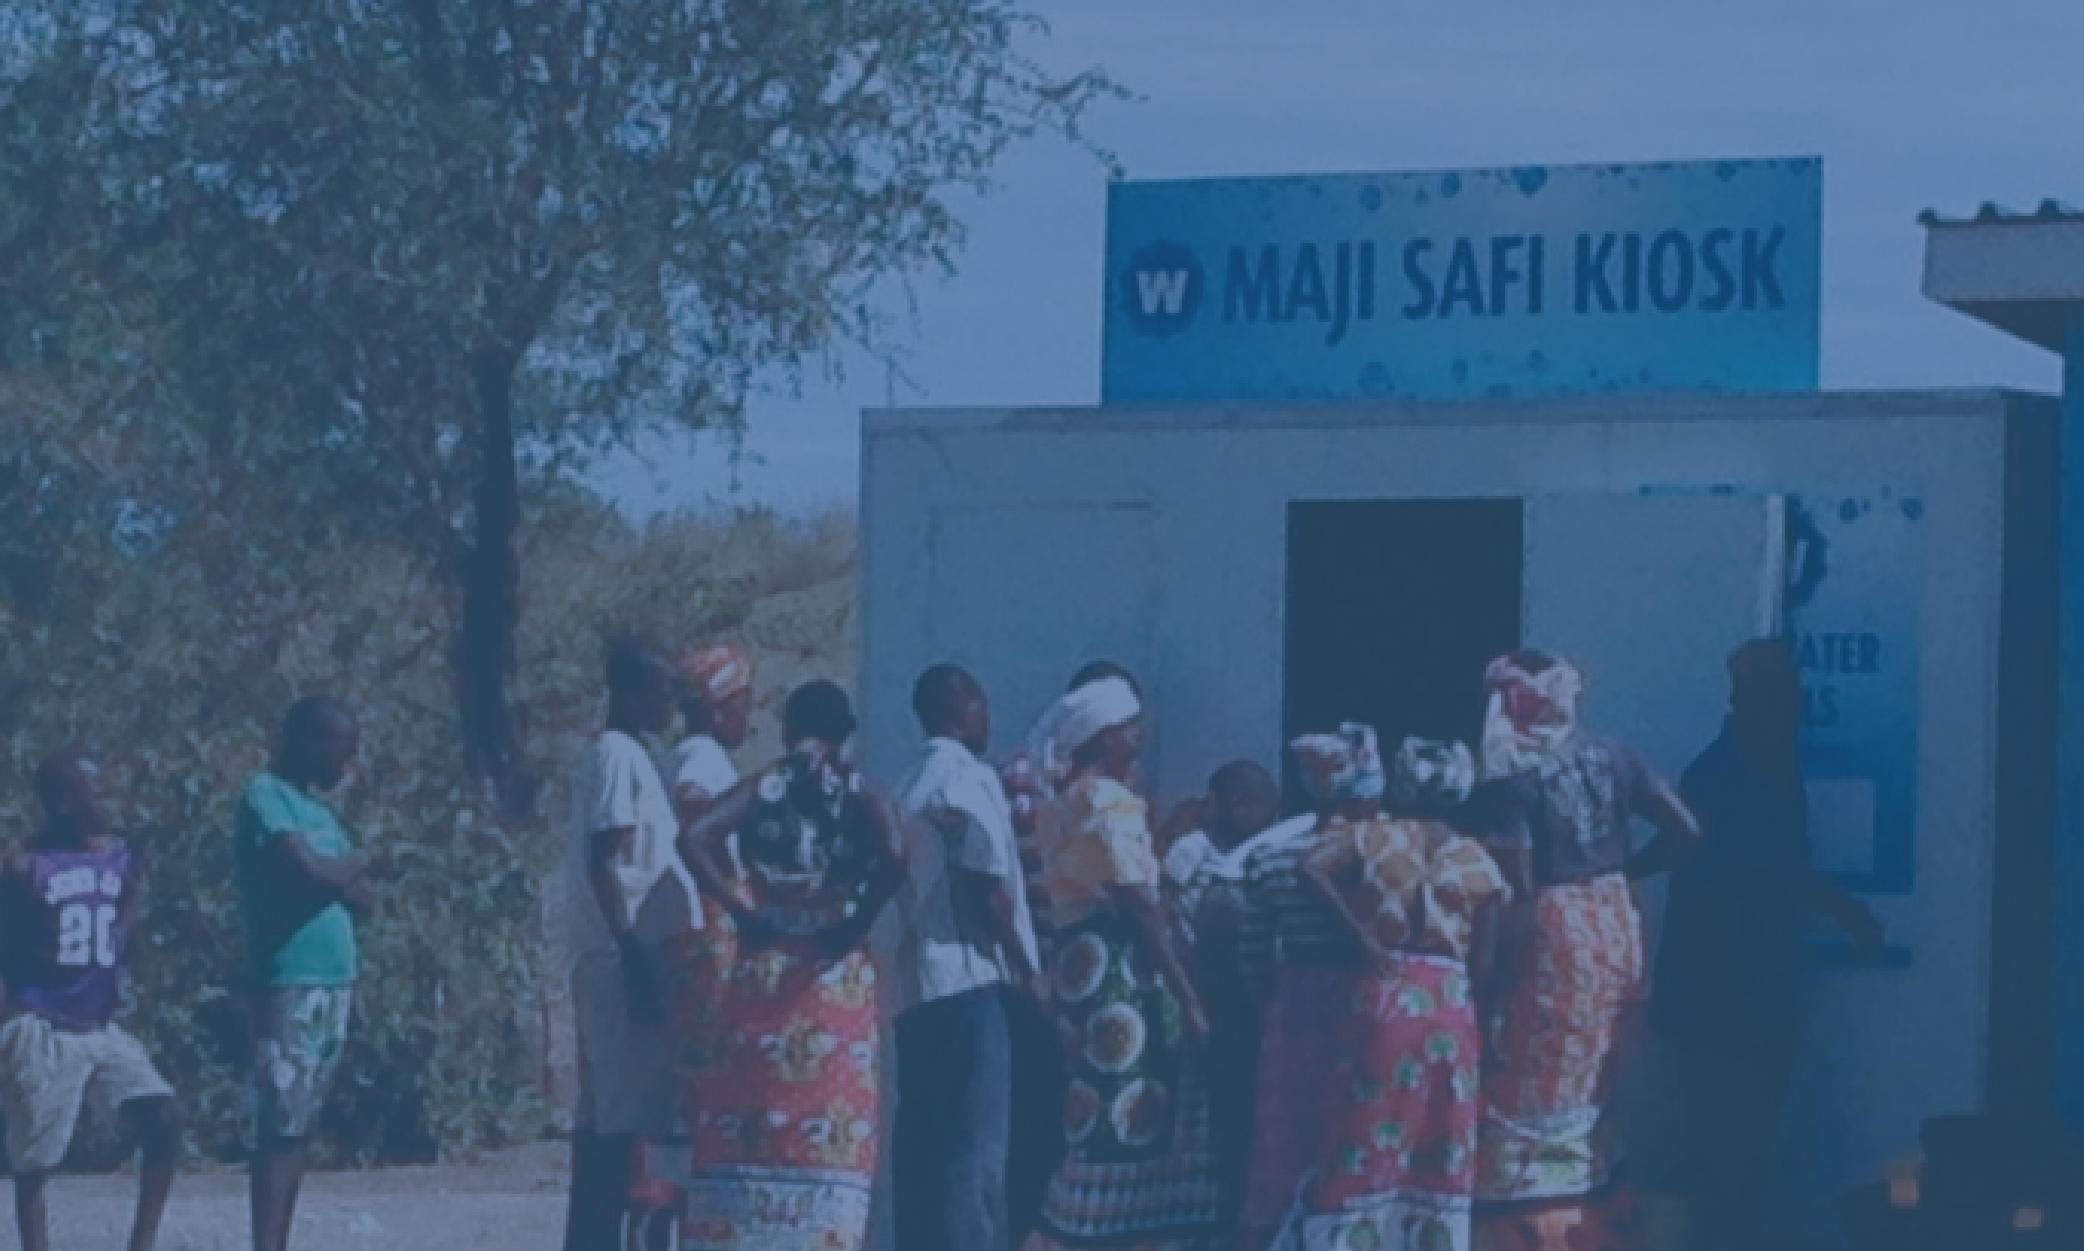 Maji Safi safe water kiosk building in Kenya. Kiosk provides safe water to the local community using the SkyHydrant ultra-filtration technology.